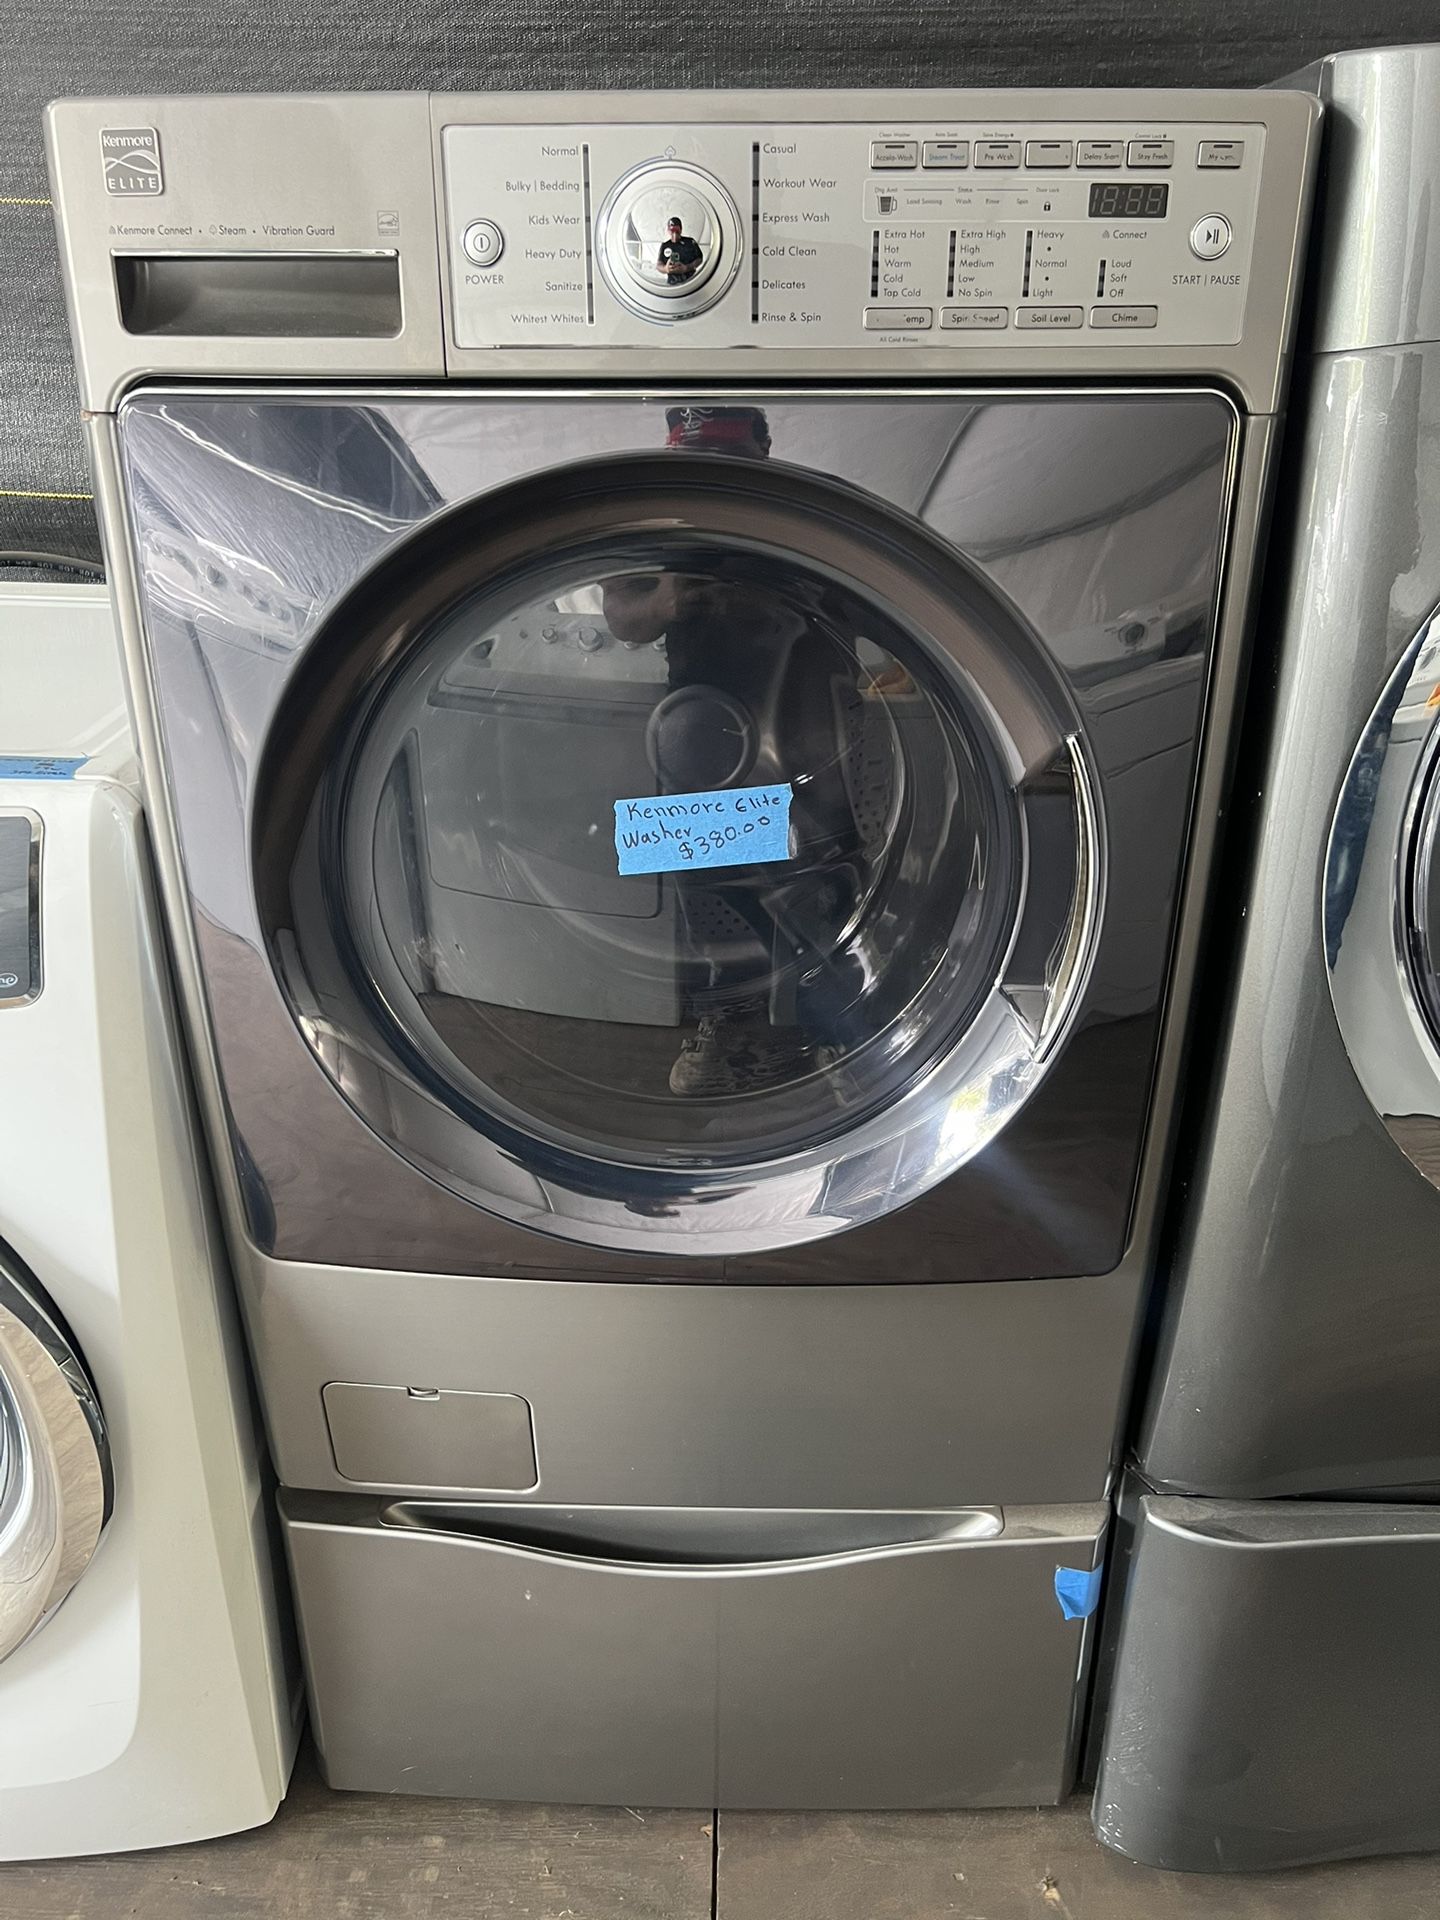 Kenmore Frontload Washer    60 day warranty/ Located at:📍5415 Carmack Rd Tampa Fl 33610📍